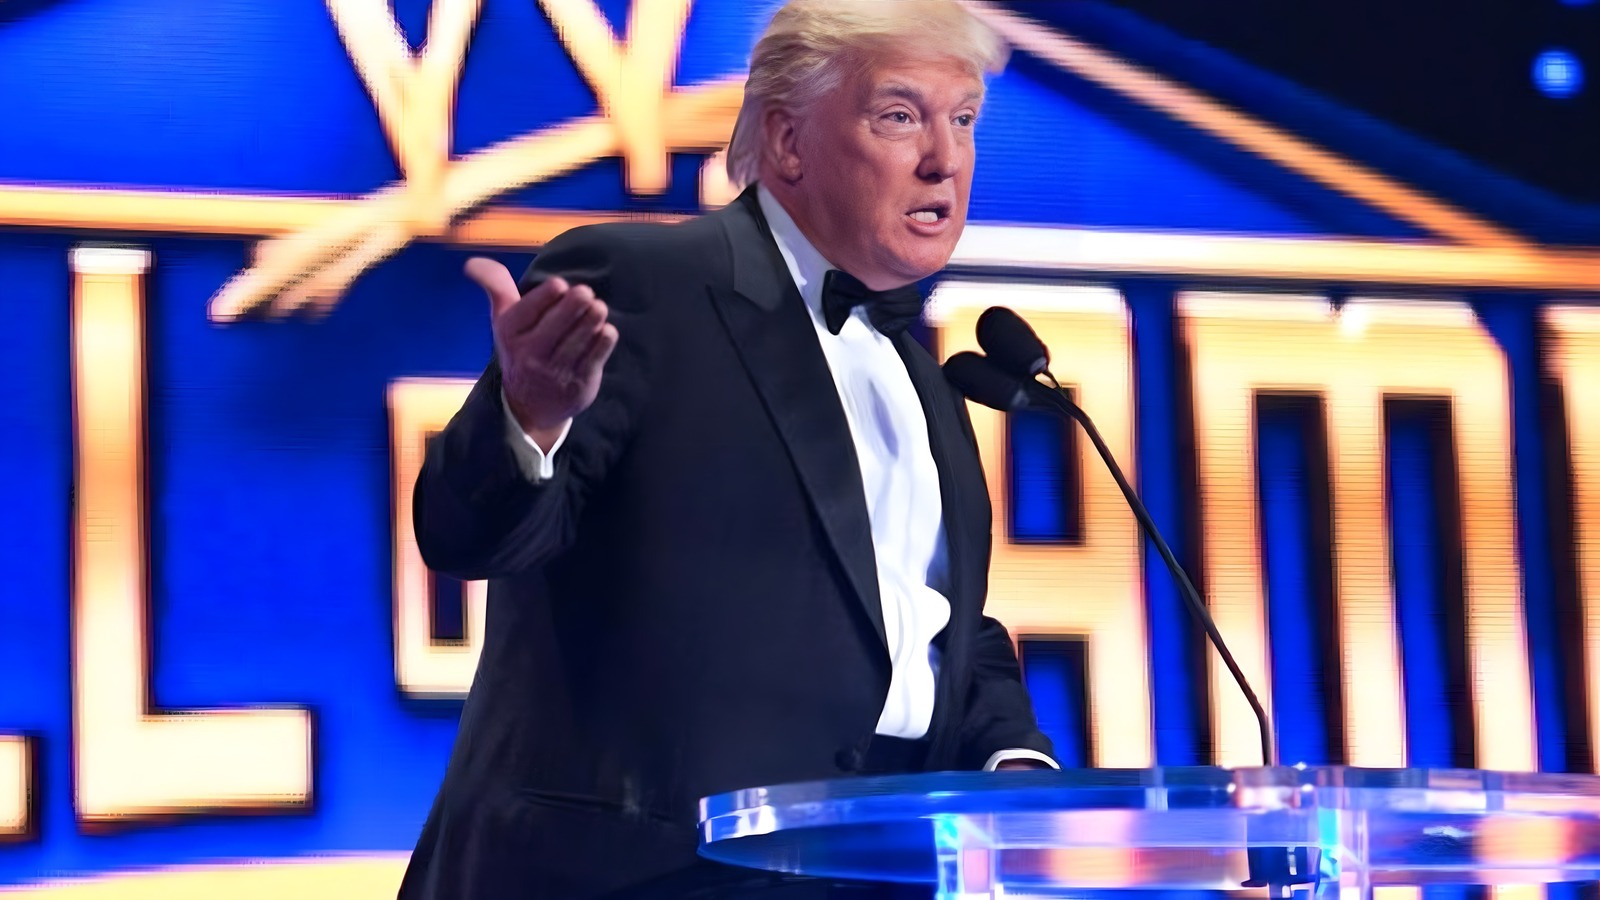 Donald Trump Praises 2 WWE Hall Of Famers During Presidential Campaign Speech